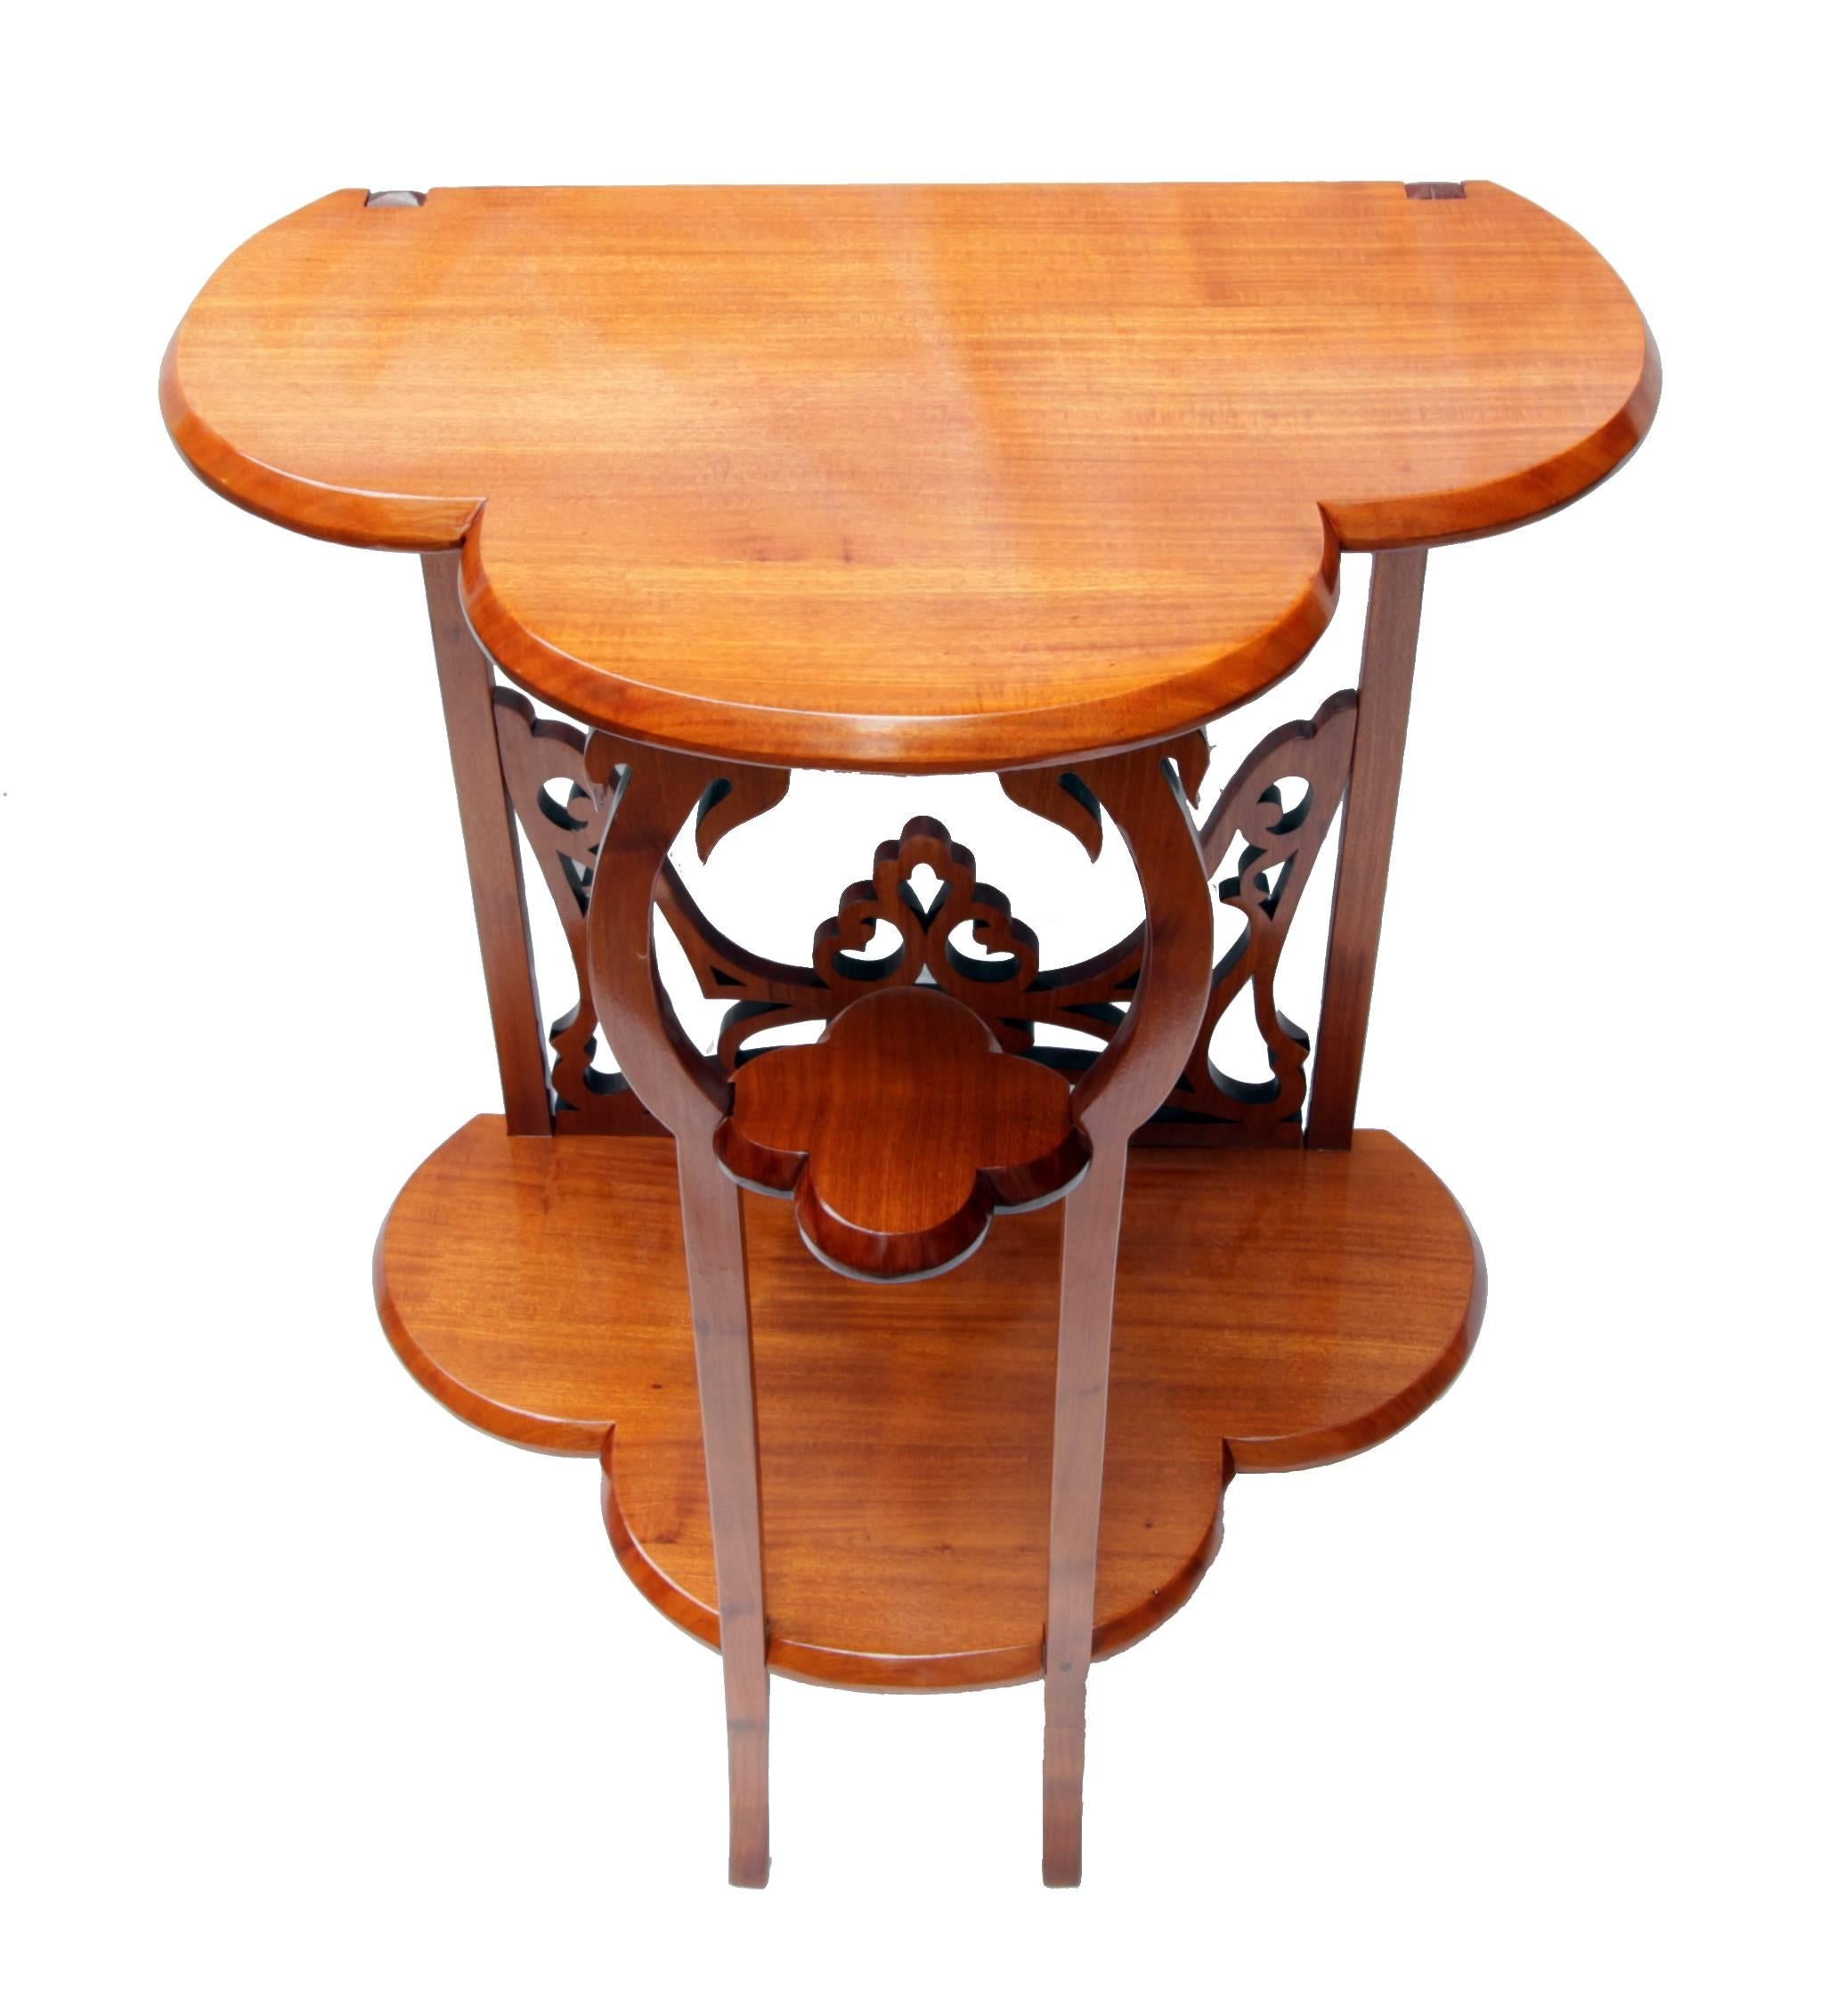 Very nice small Art Nouveau console table in solid mahogany with great Art Nouveau ornaments.Beautiful Art Nouveau ornament carving in the back. In very good restored condition.